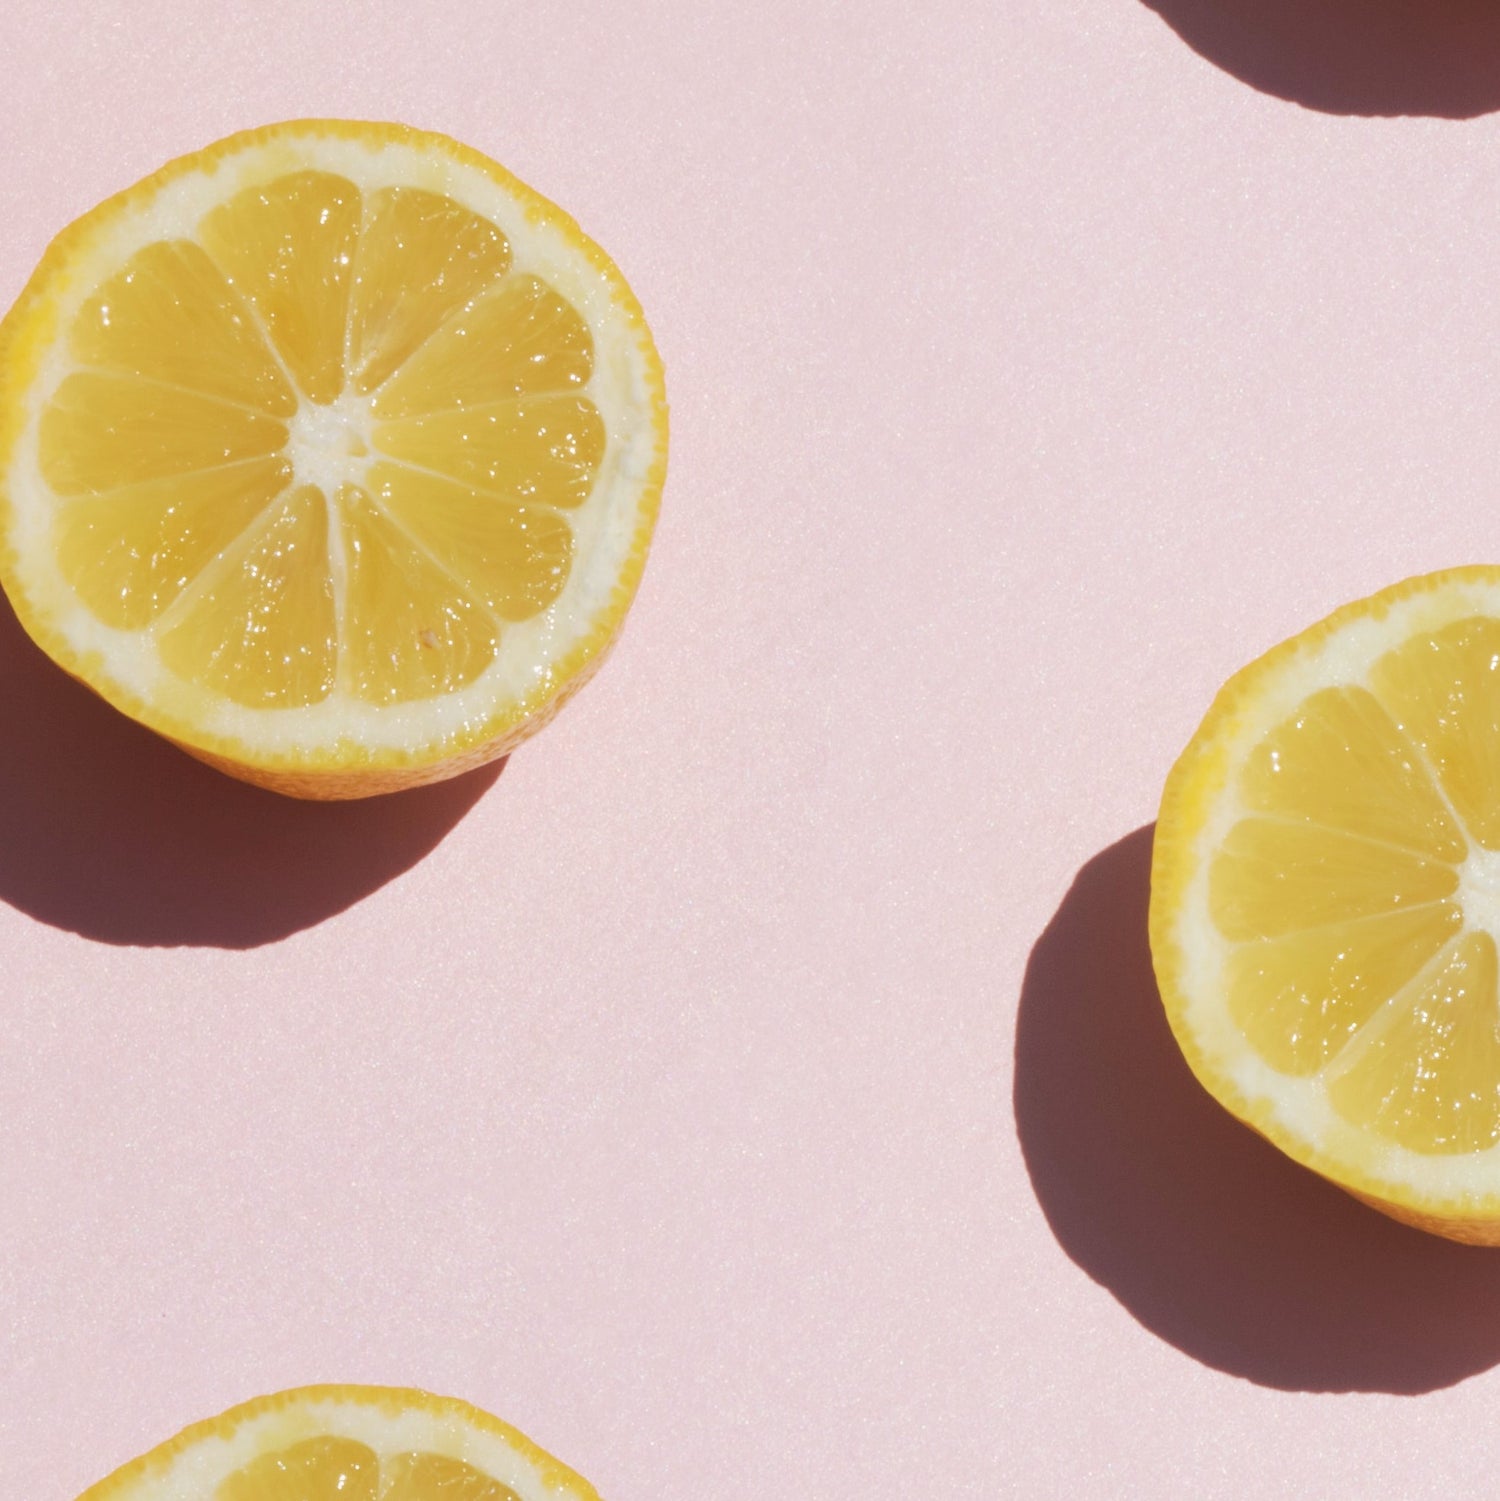 SKIN 101: EVERYTHING YOU NEED TO KNOW ABOUT VITAMIN C